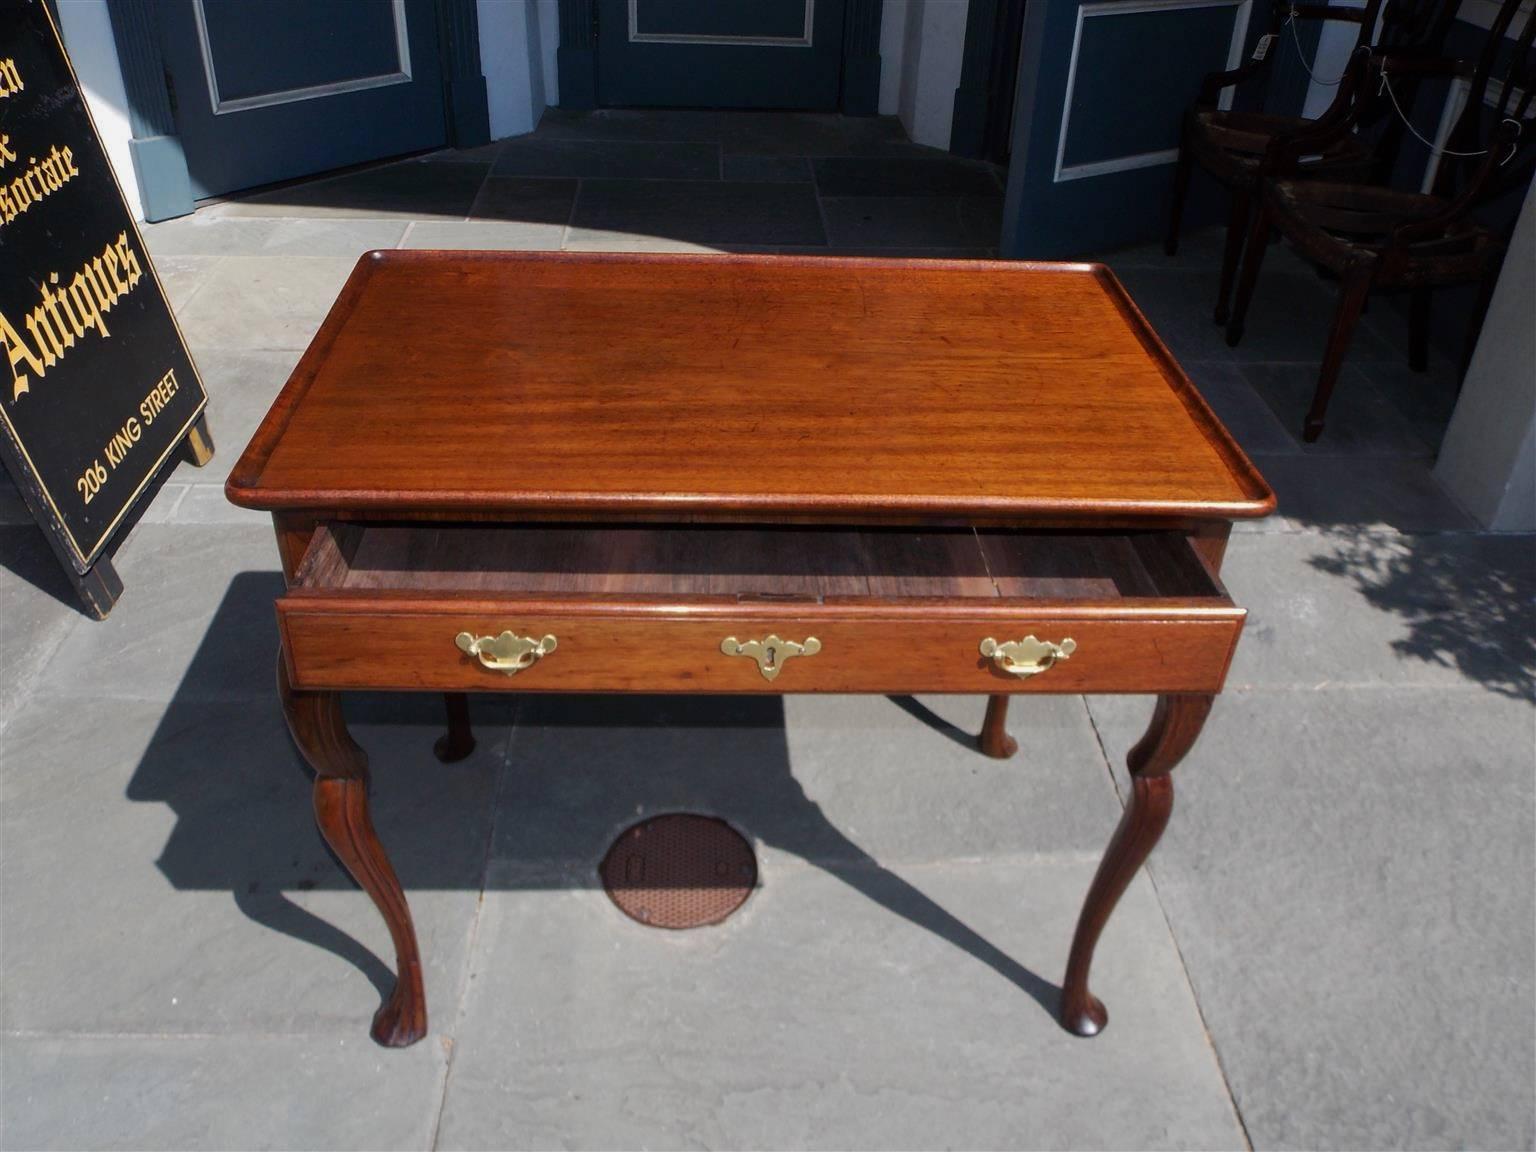 Hand-Carved English Chippendale Mahogany Dish Top Tea Table, Circa 1760 For Sale